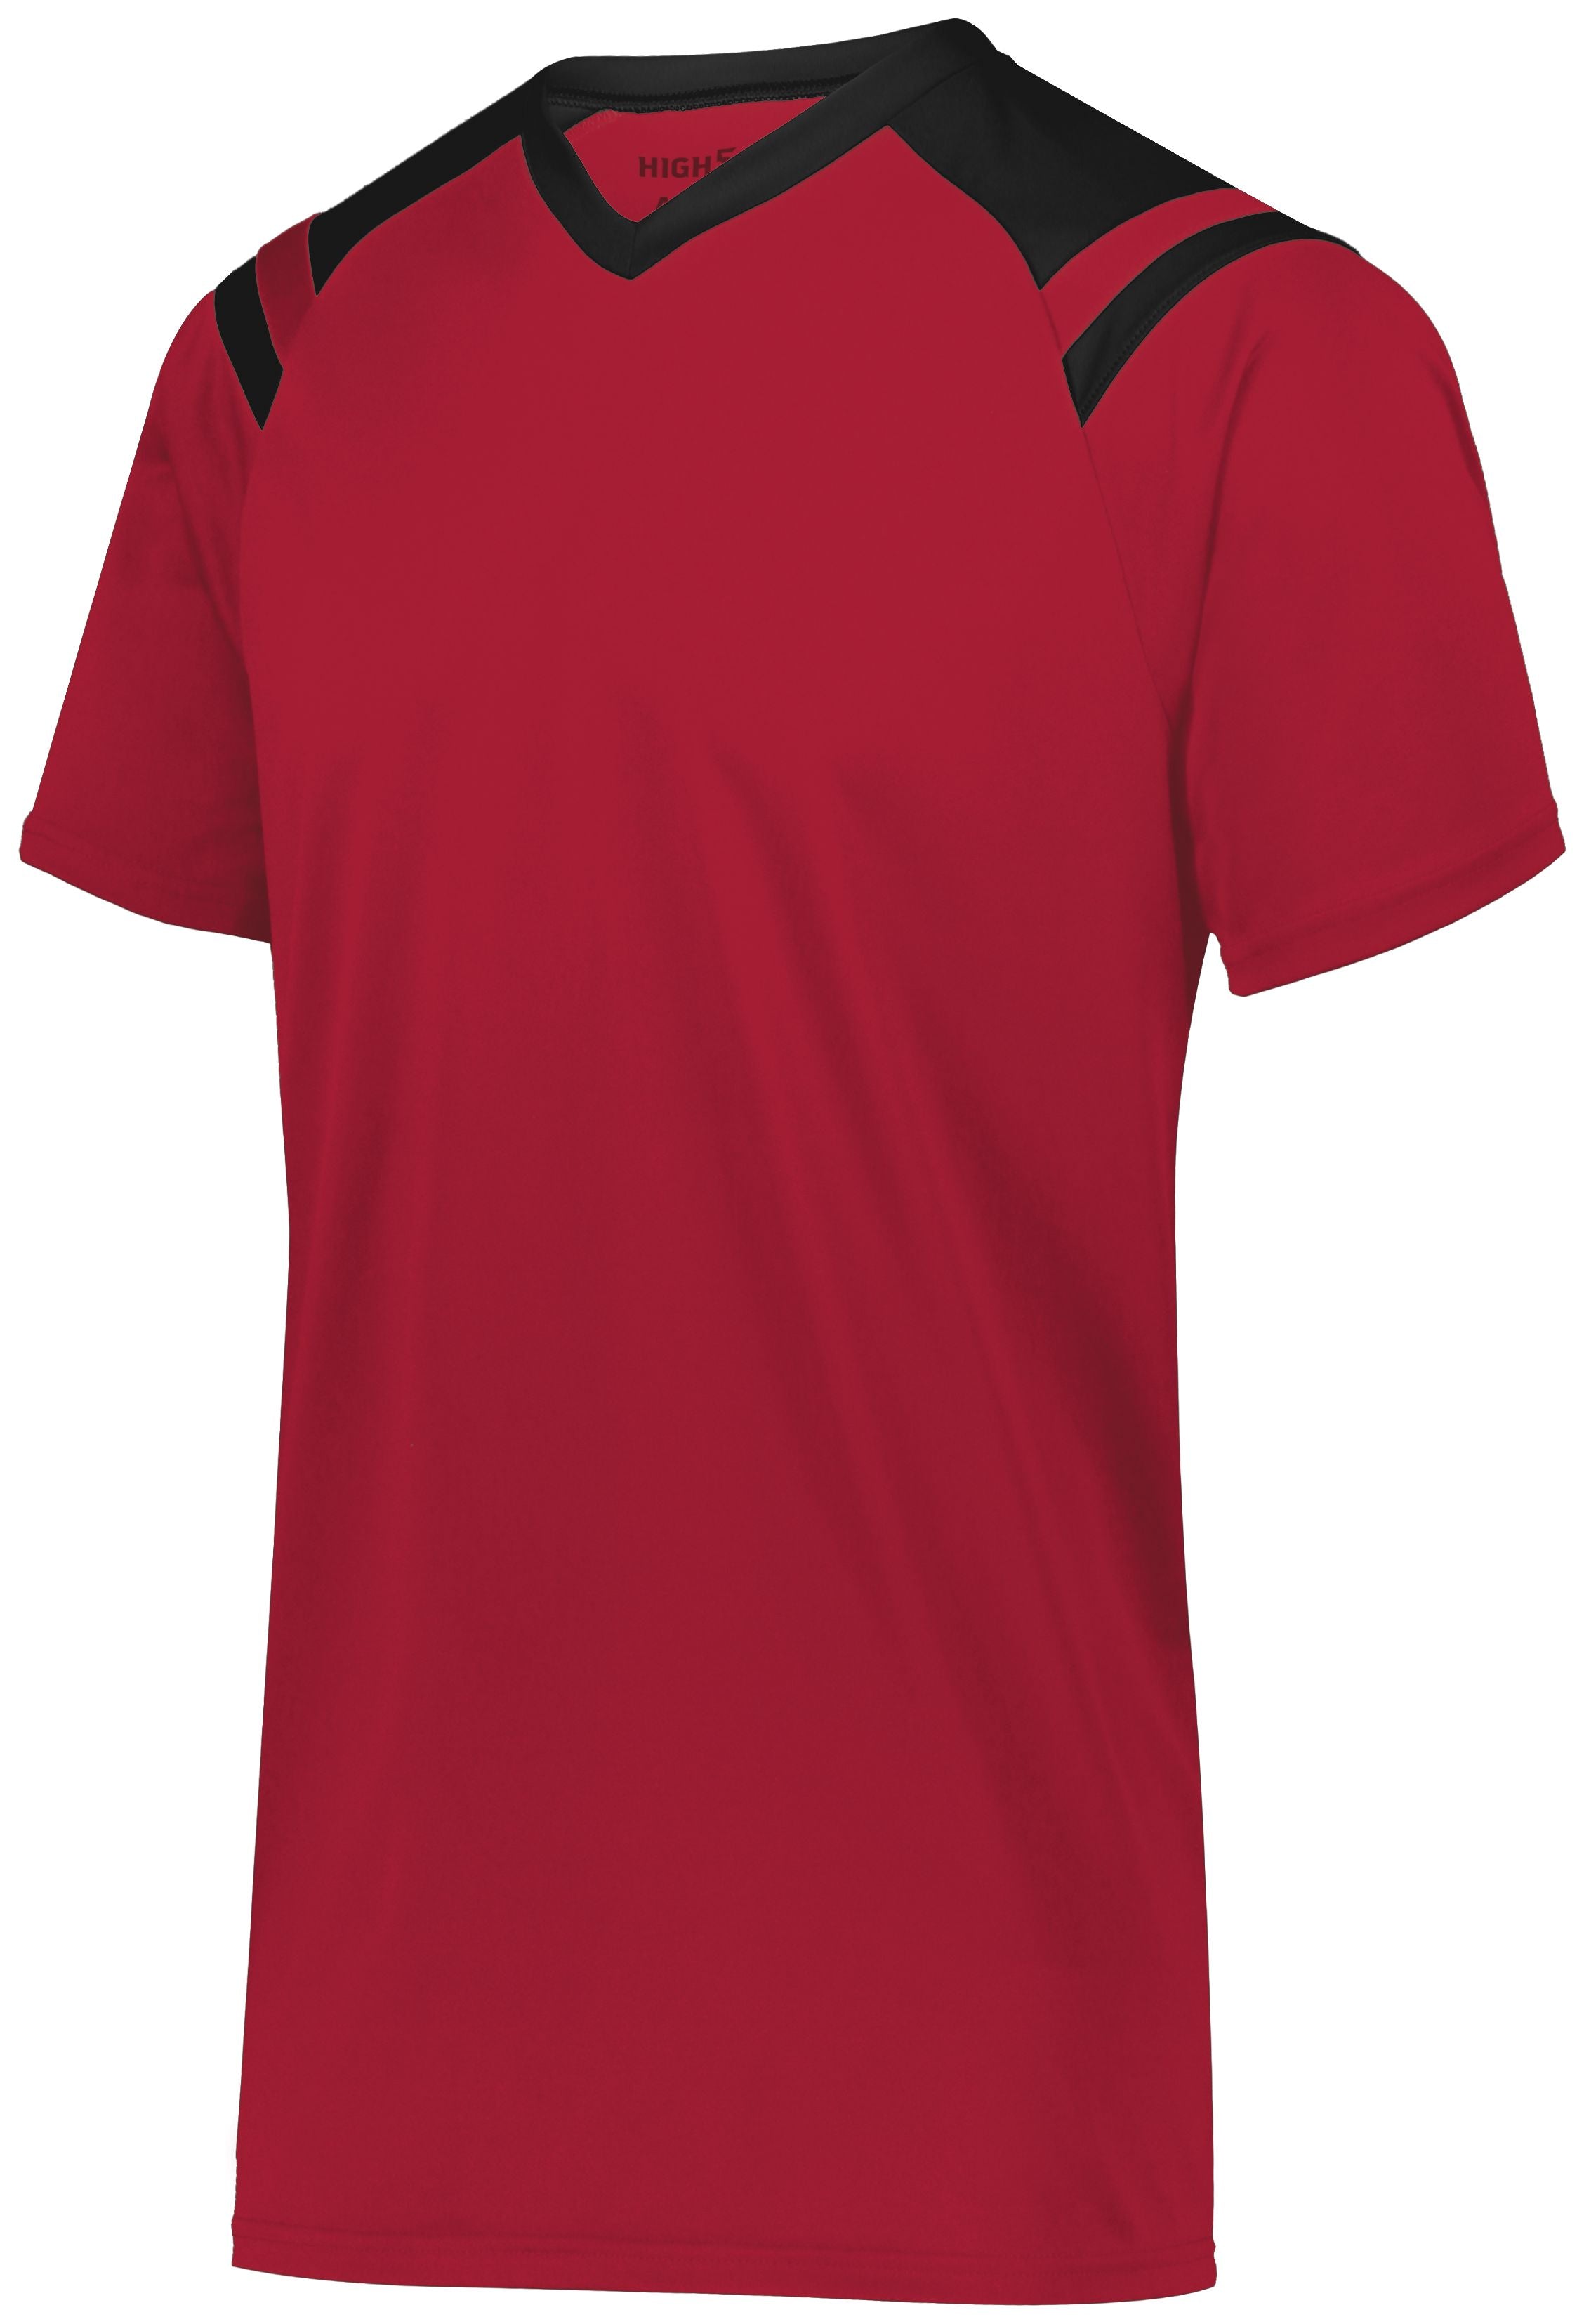 High 5 Youth Sheffield Jersey in Scarlet/Black  -Part of the Youth, Youth-Jersey, High5-Products, Soccer, Shirts, All-Sports-1, Sheffield-Soccer-Jerseys product lines at KanaleyCreations.com